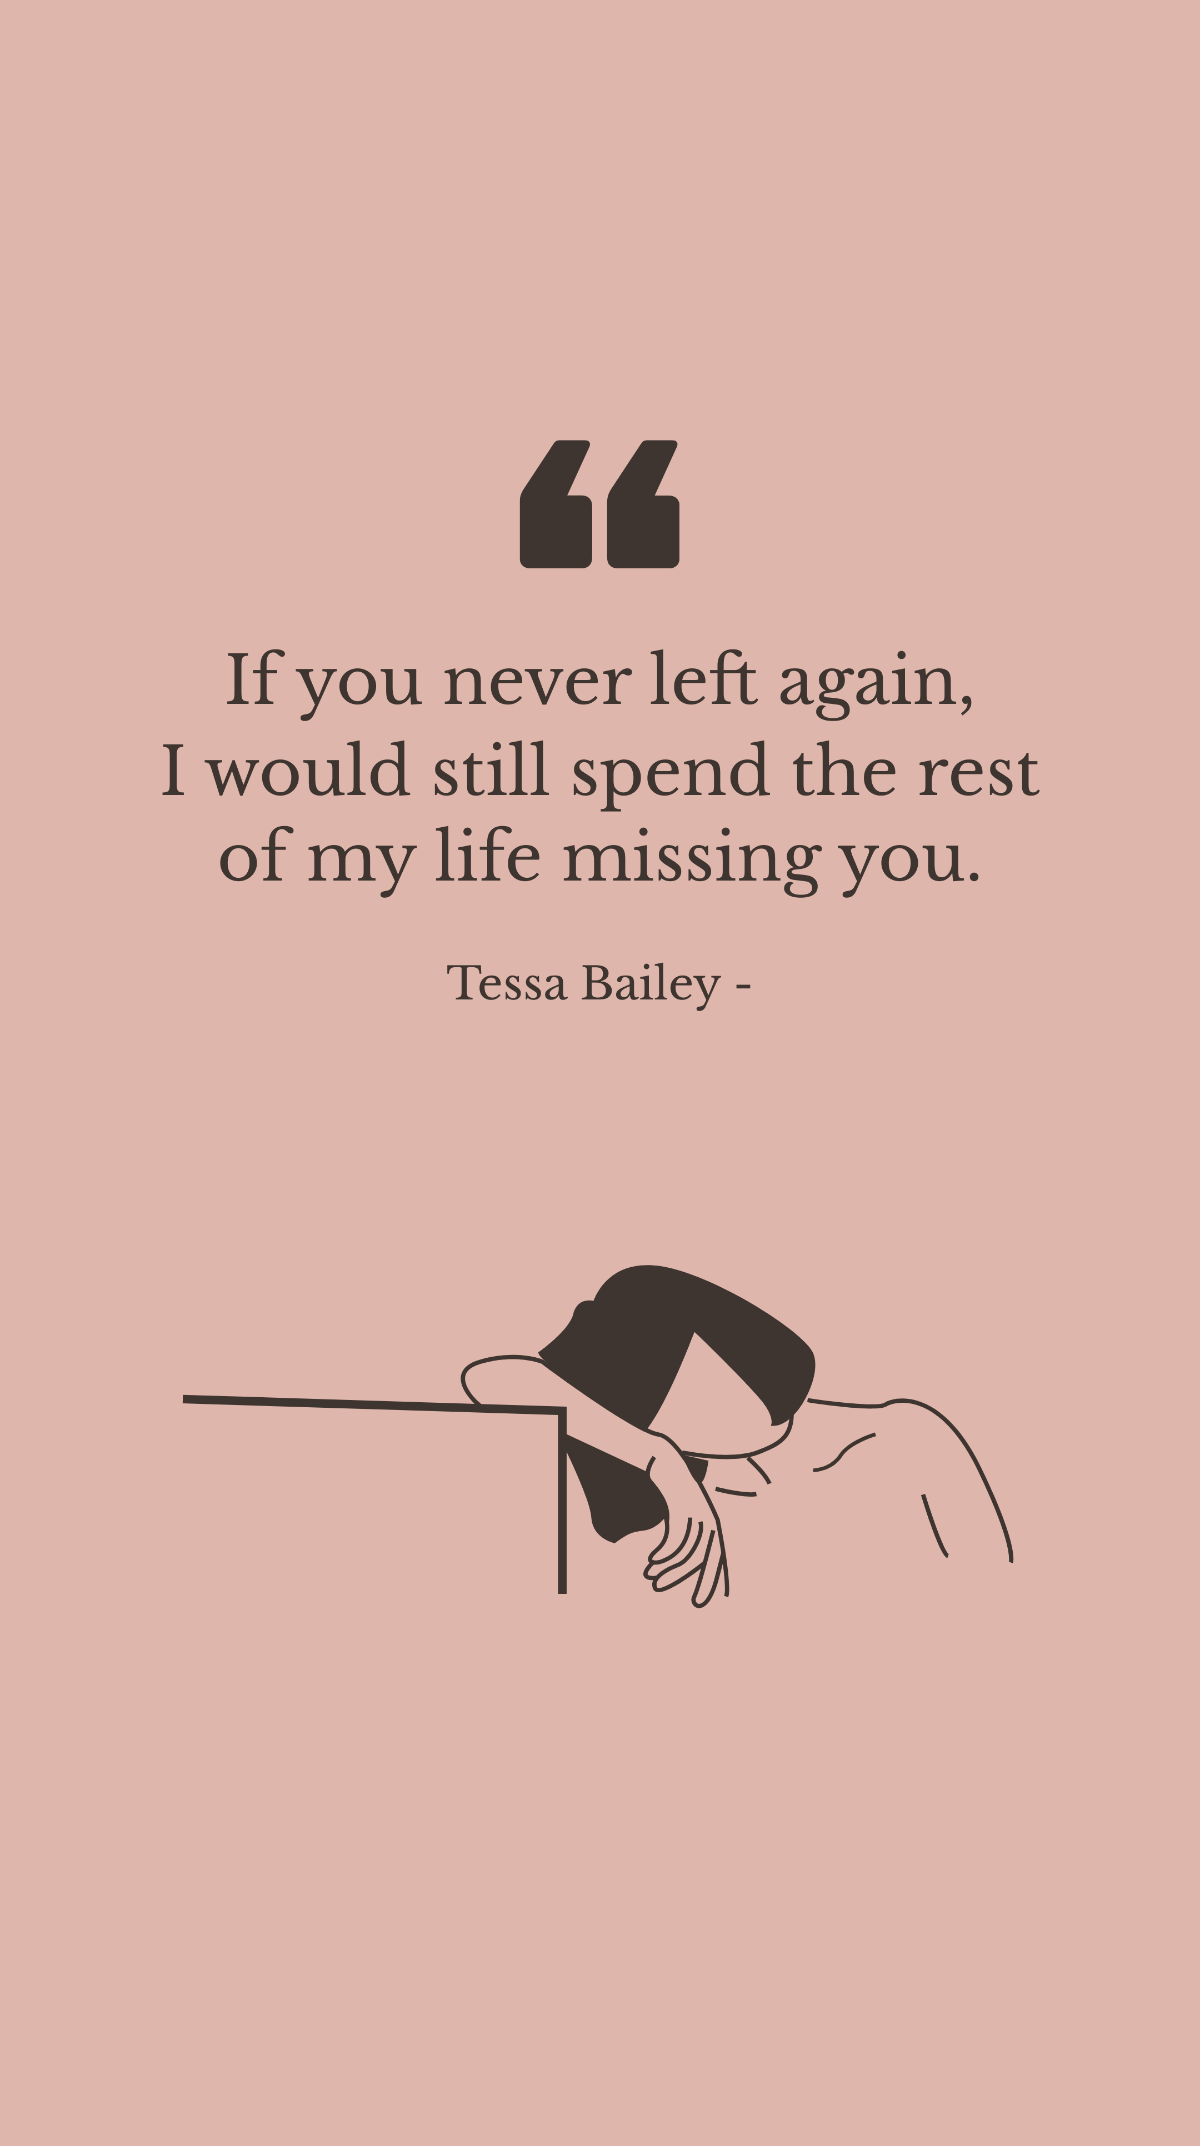 Tessa Bailey - If you never left again, I would still spend the rest of my life missing you. Template